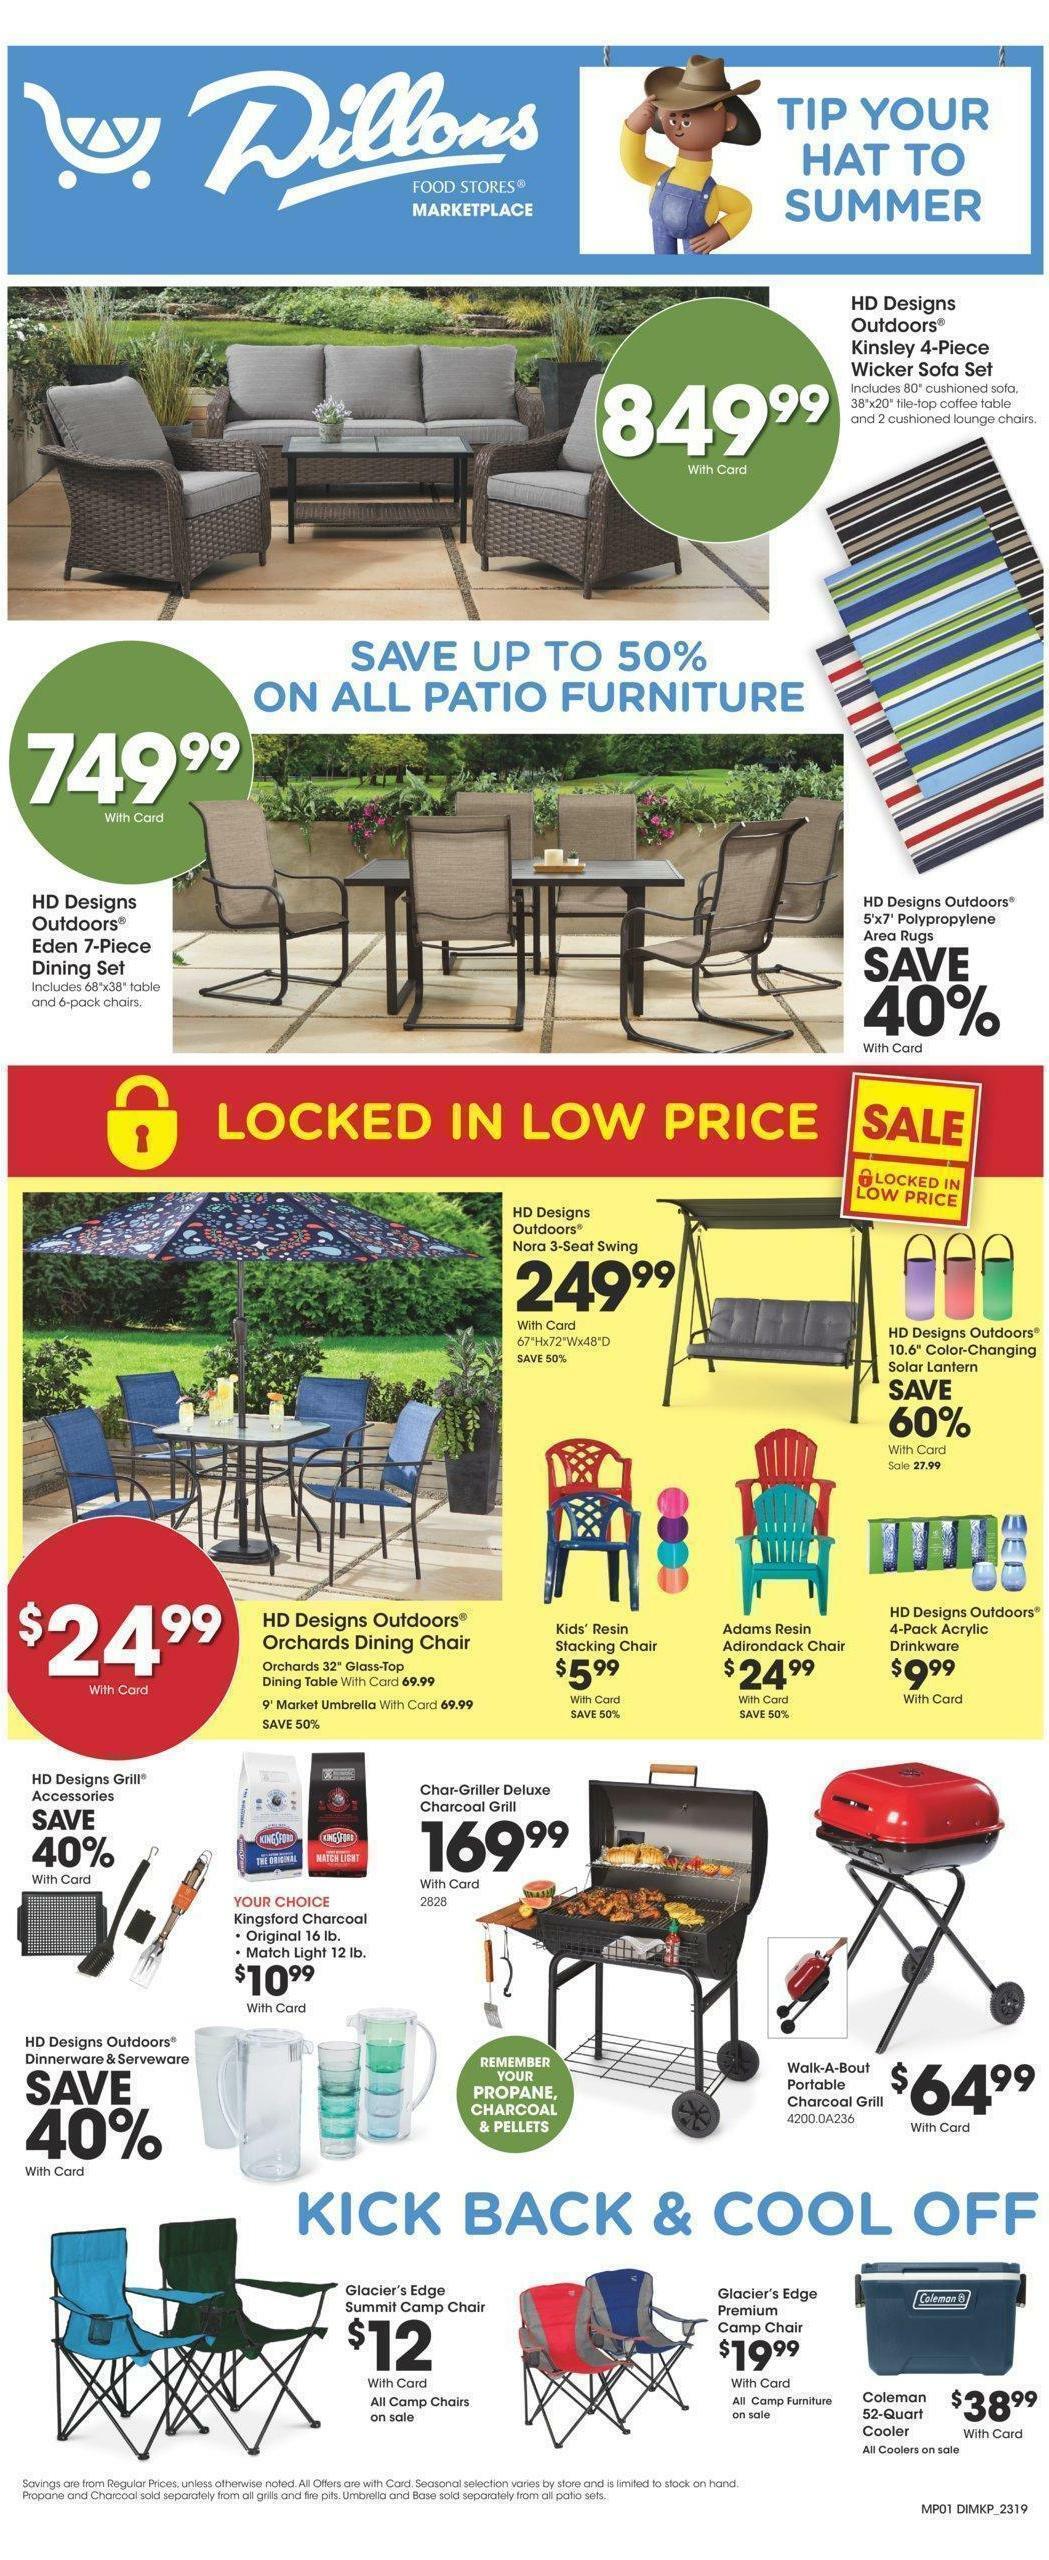 Dillons Summer Tip Weekly Ad from June 7